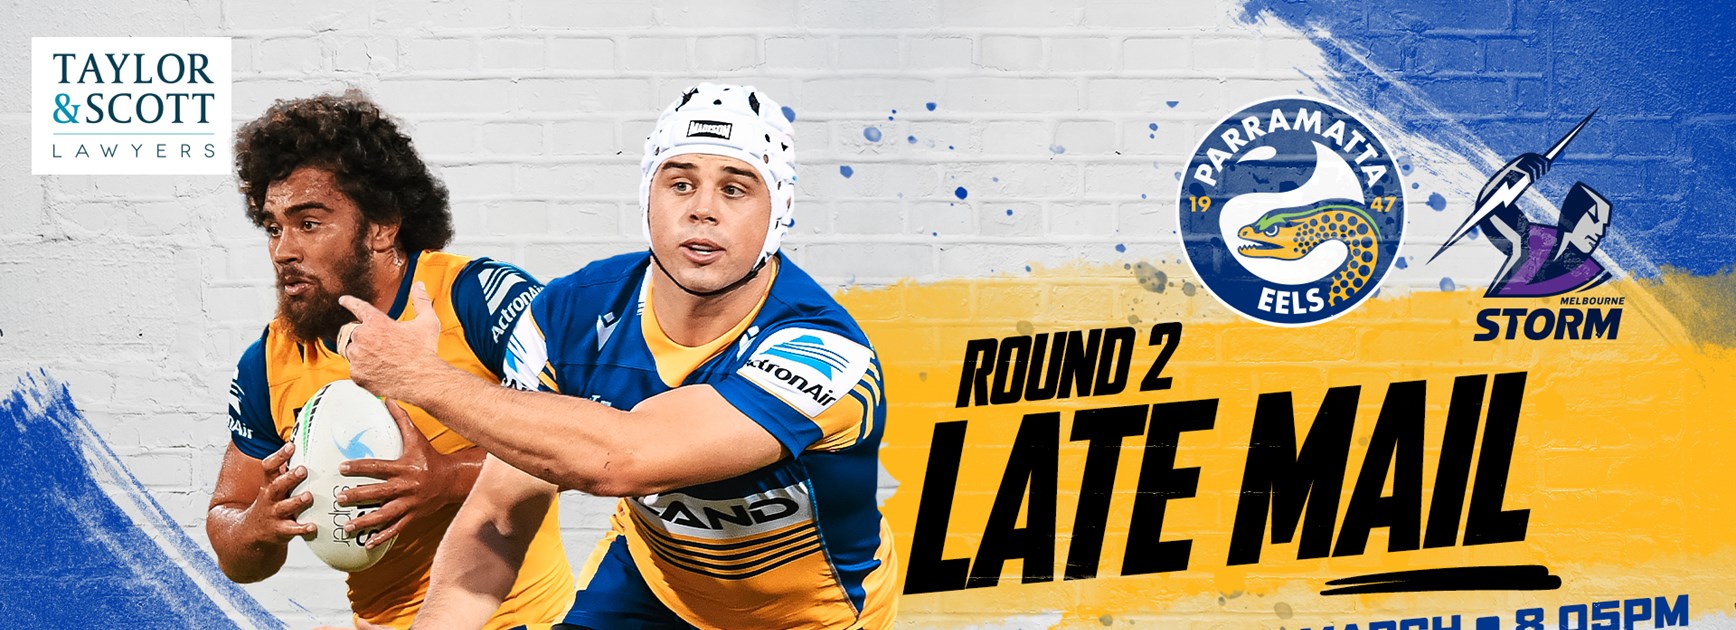 Late Mail - Eels v Storm, Round Two